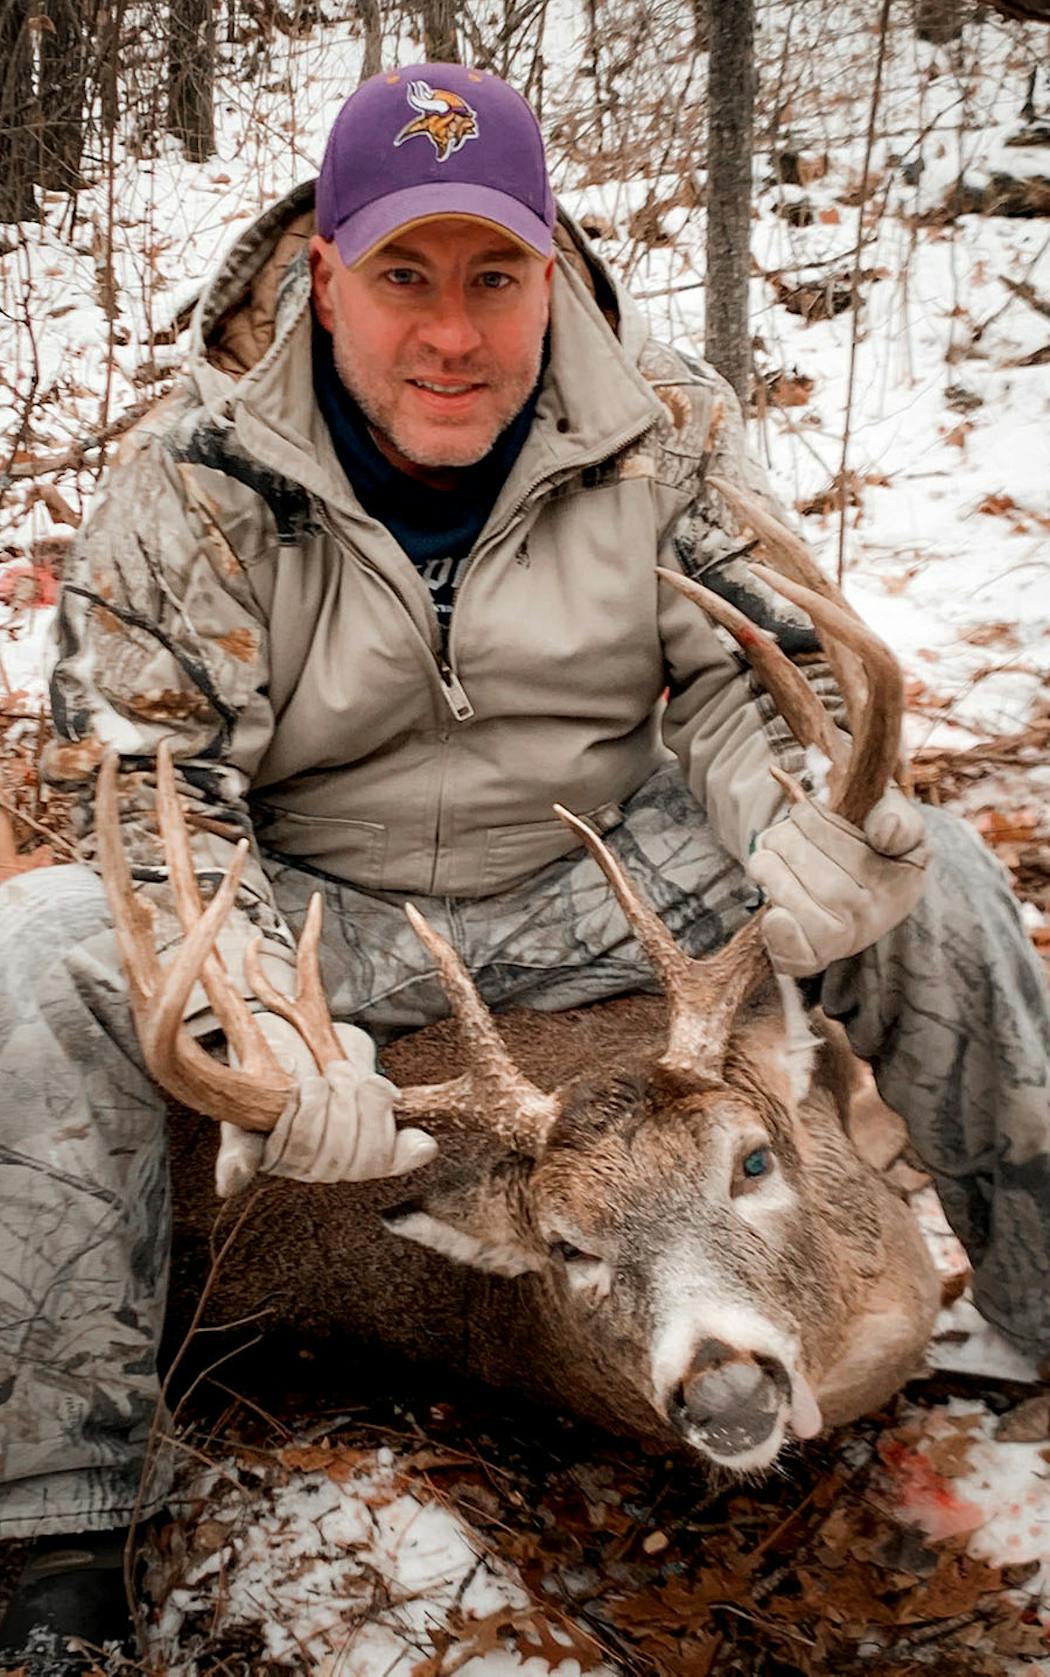 Tim Gulland, 39, of Mayer, Minn., shot a 14-point buck at 7:57 a.m. on opening day on state public land near White Earth. With a green score of 179, it broke the trophy buck record for his family-and-friends deer camp that had stood since 1986.